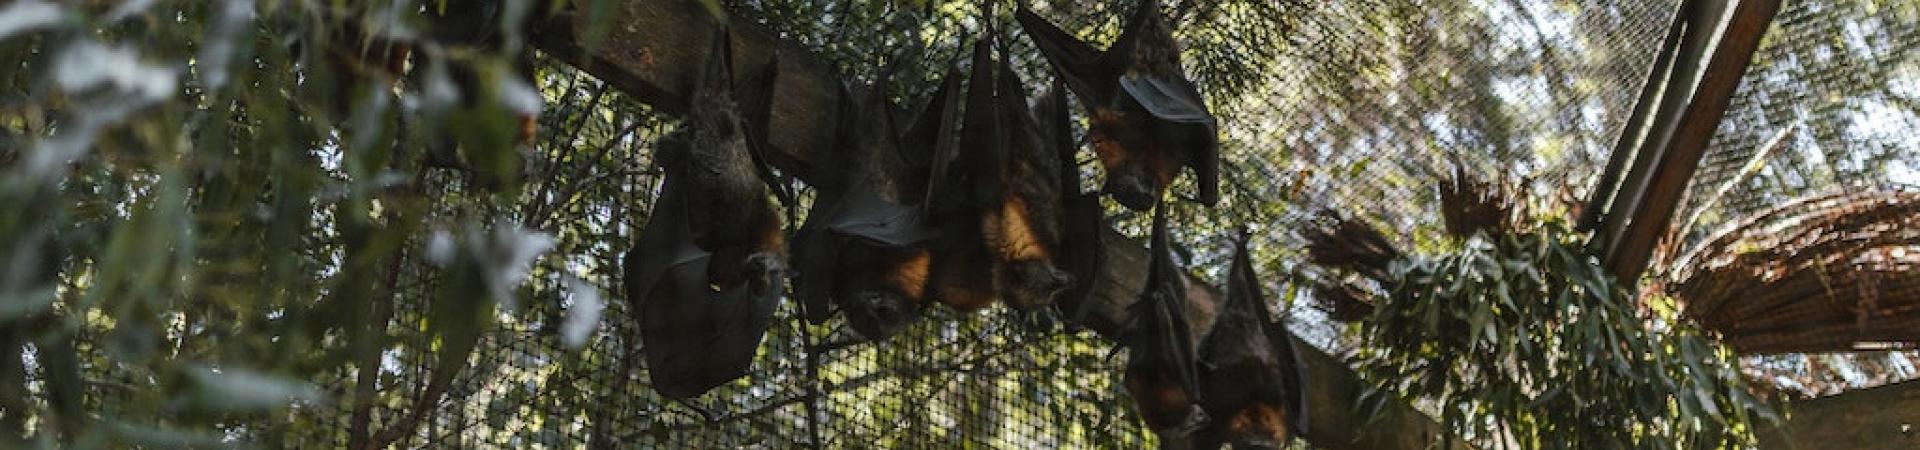 Bats in a cage